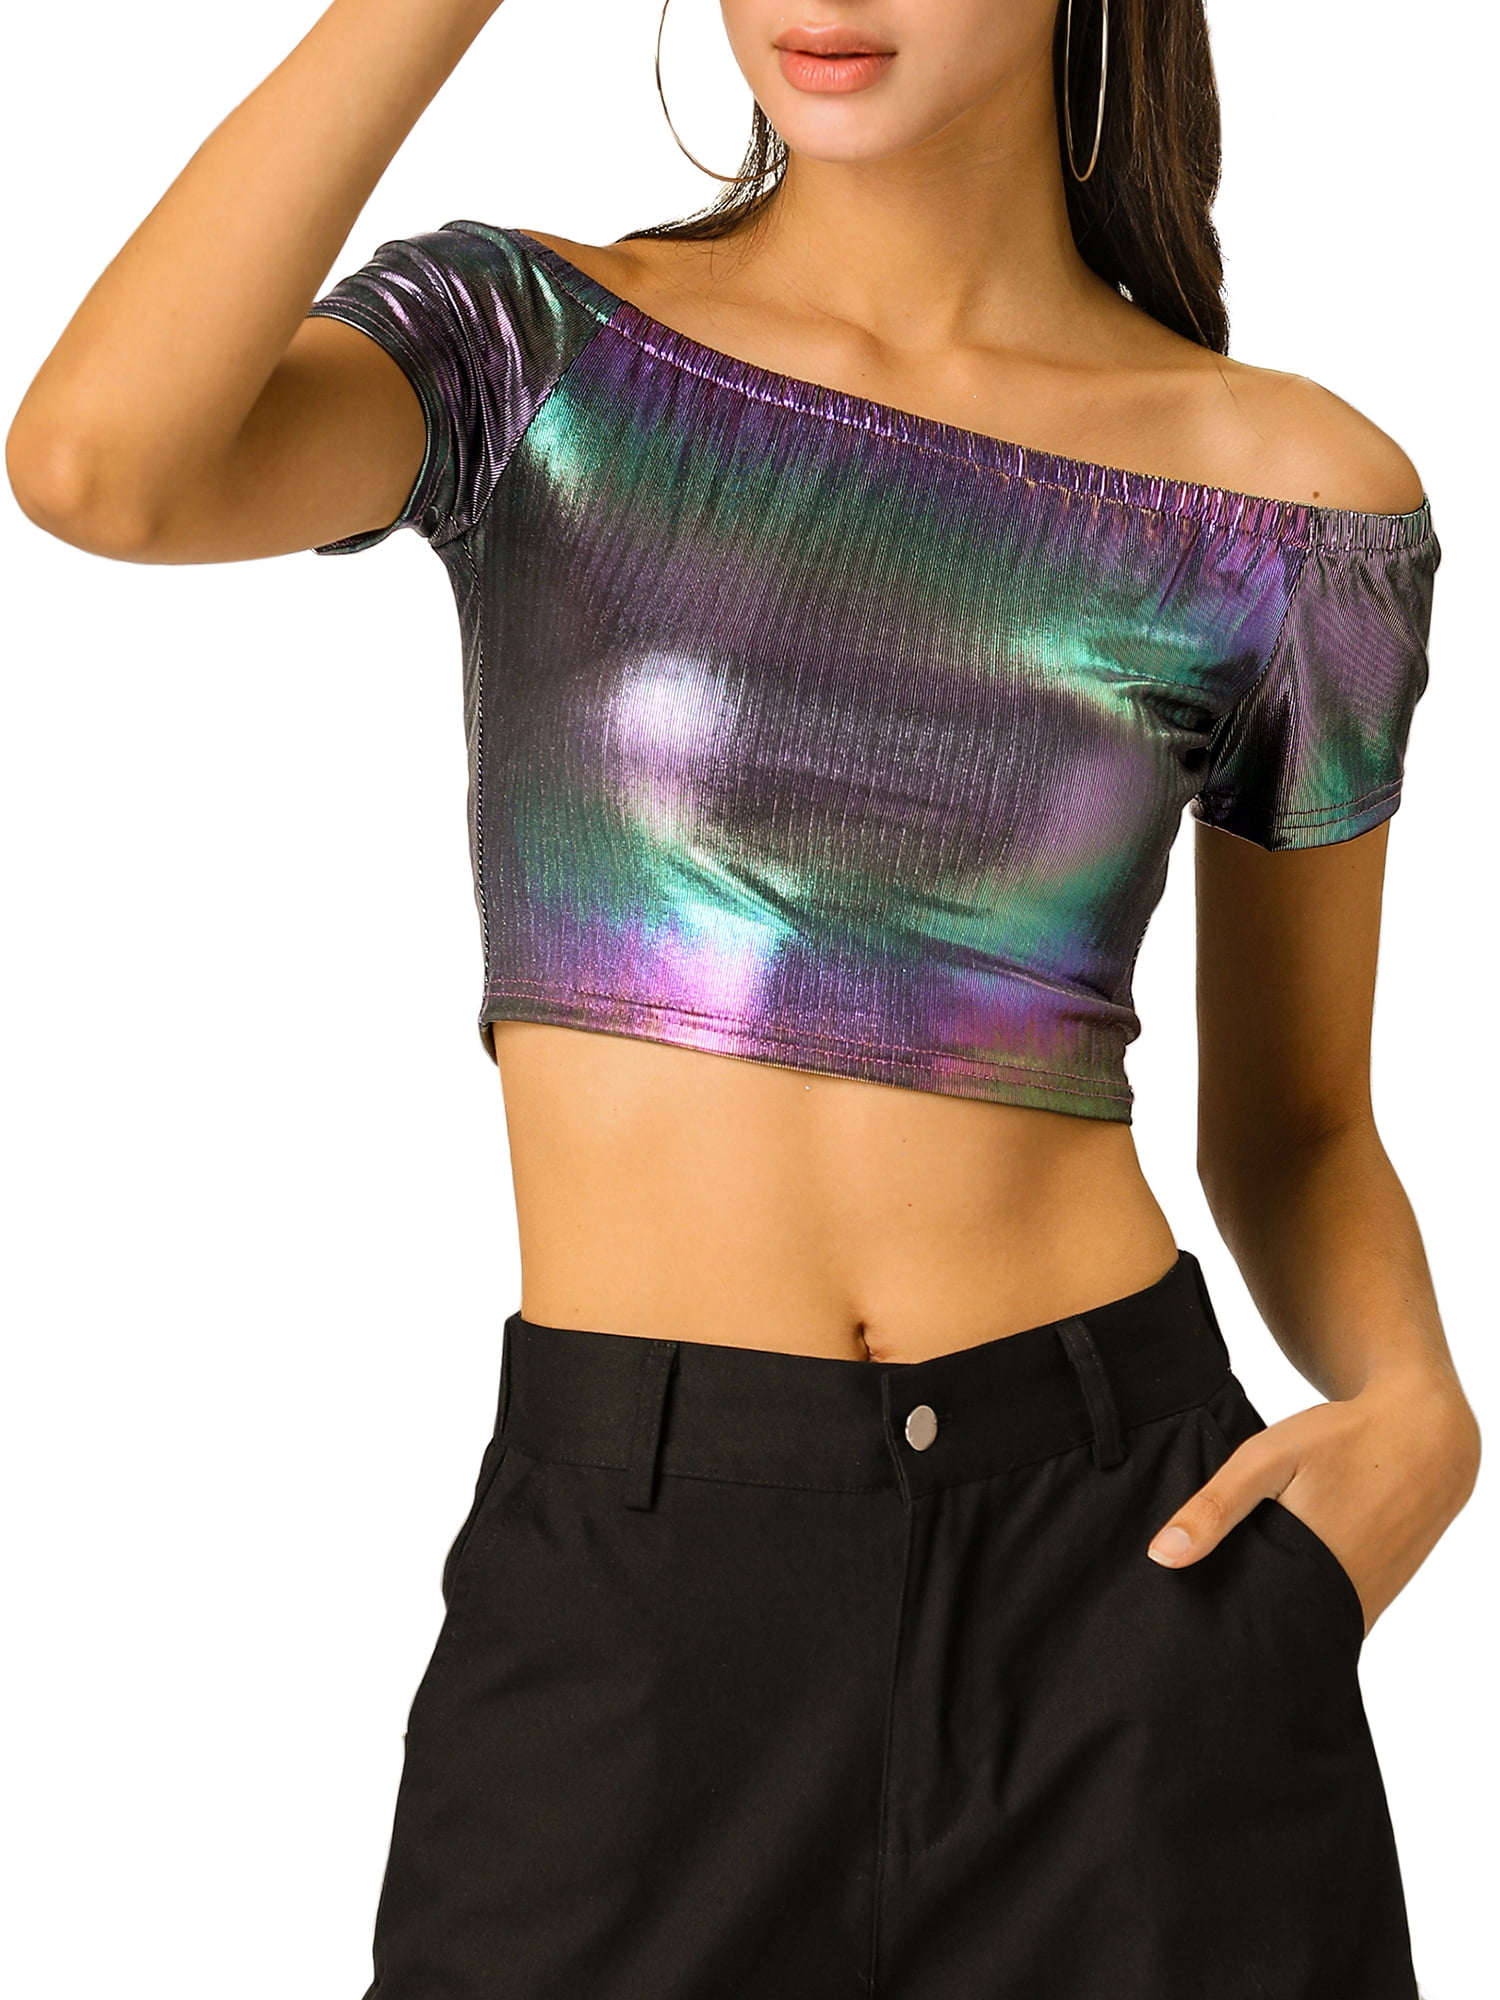 2x Women Girls Sparkling Sequins Tube Dance Blouse Stretchy Party Crop Tops